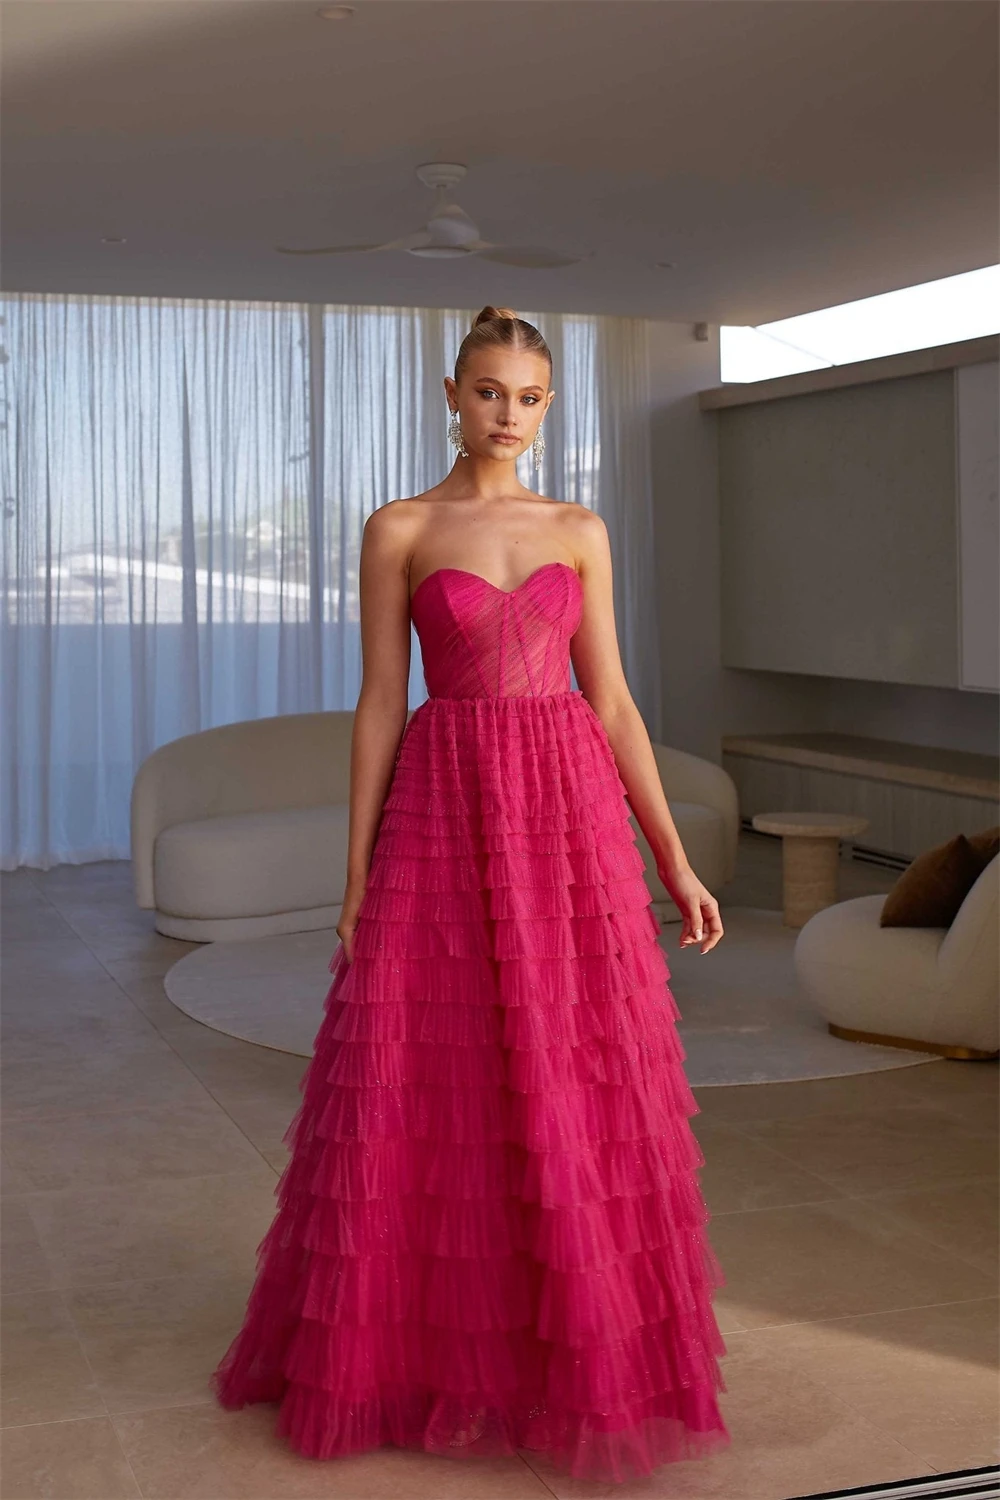 

Sparkly Sweetheart Tulle Evening Dress With Split Side Backless Sleeveless Formal Cocktail Illusion Tiered Ruffles Prom Gowns